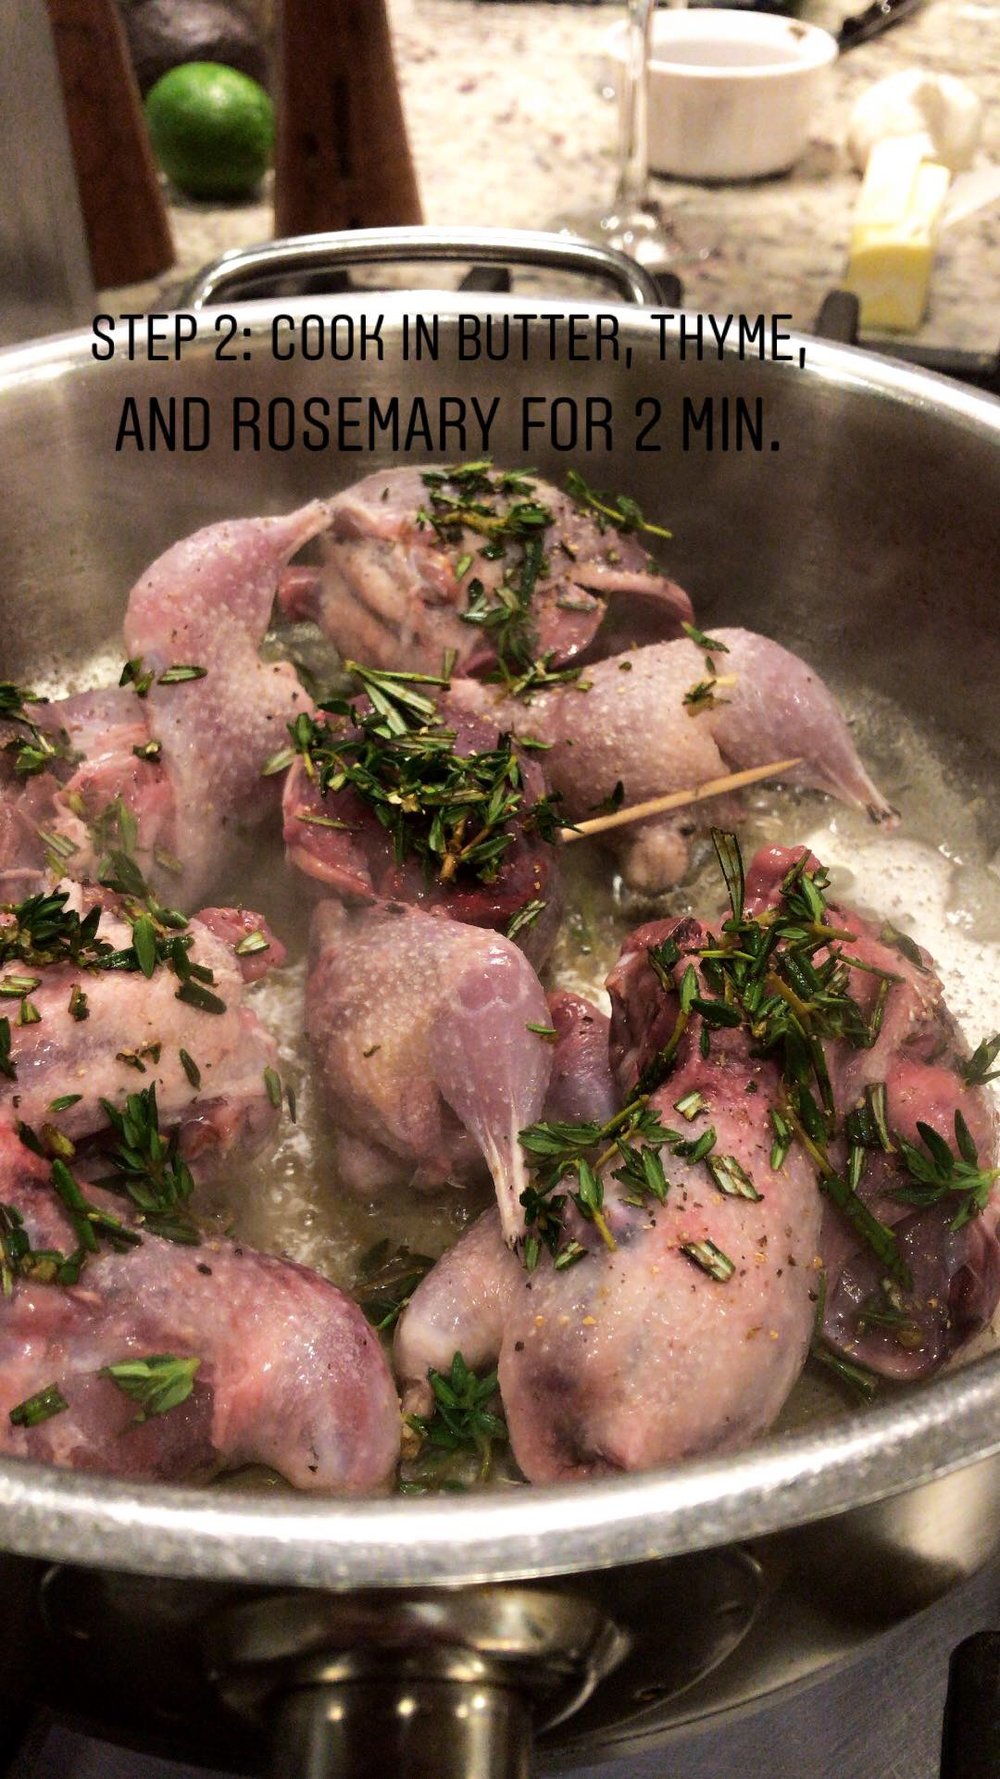  Step 2: cook in a pan over medium heat with butter, thyme, and rosemary, for 2 minutes on each side (total of 4 minutes) and another 2 minutes on the back 